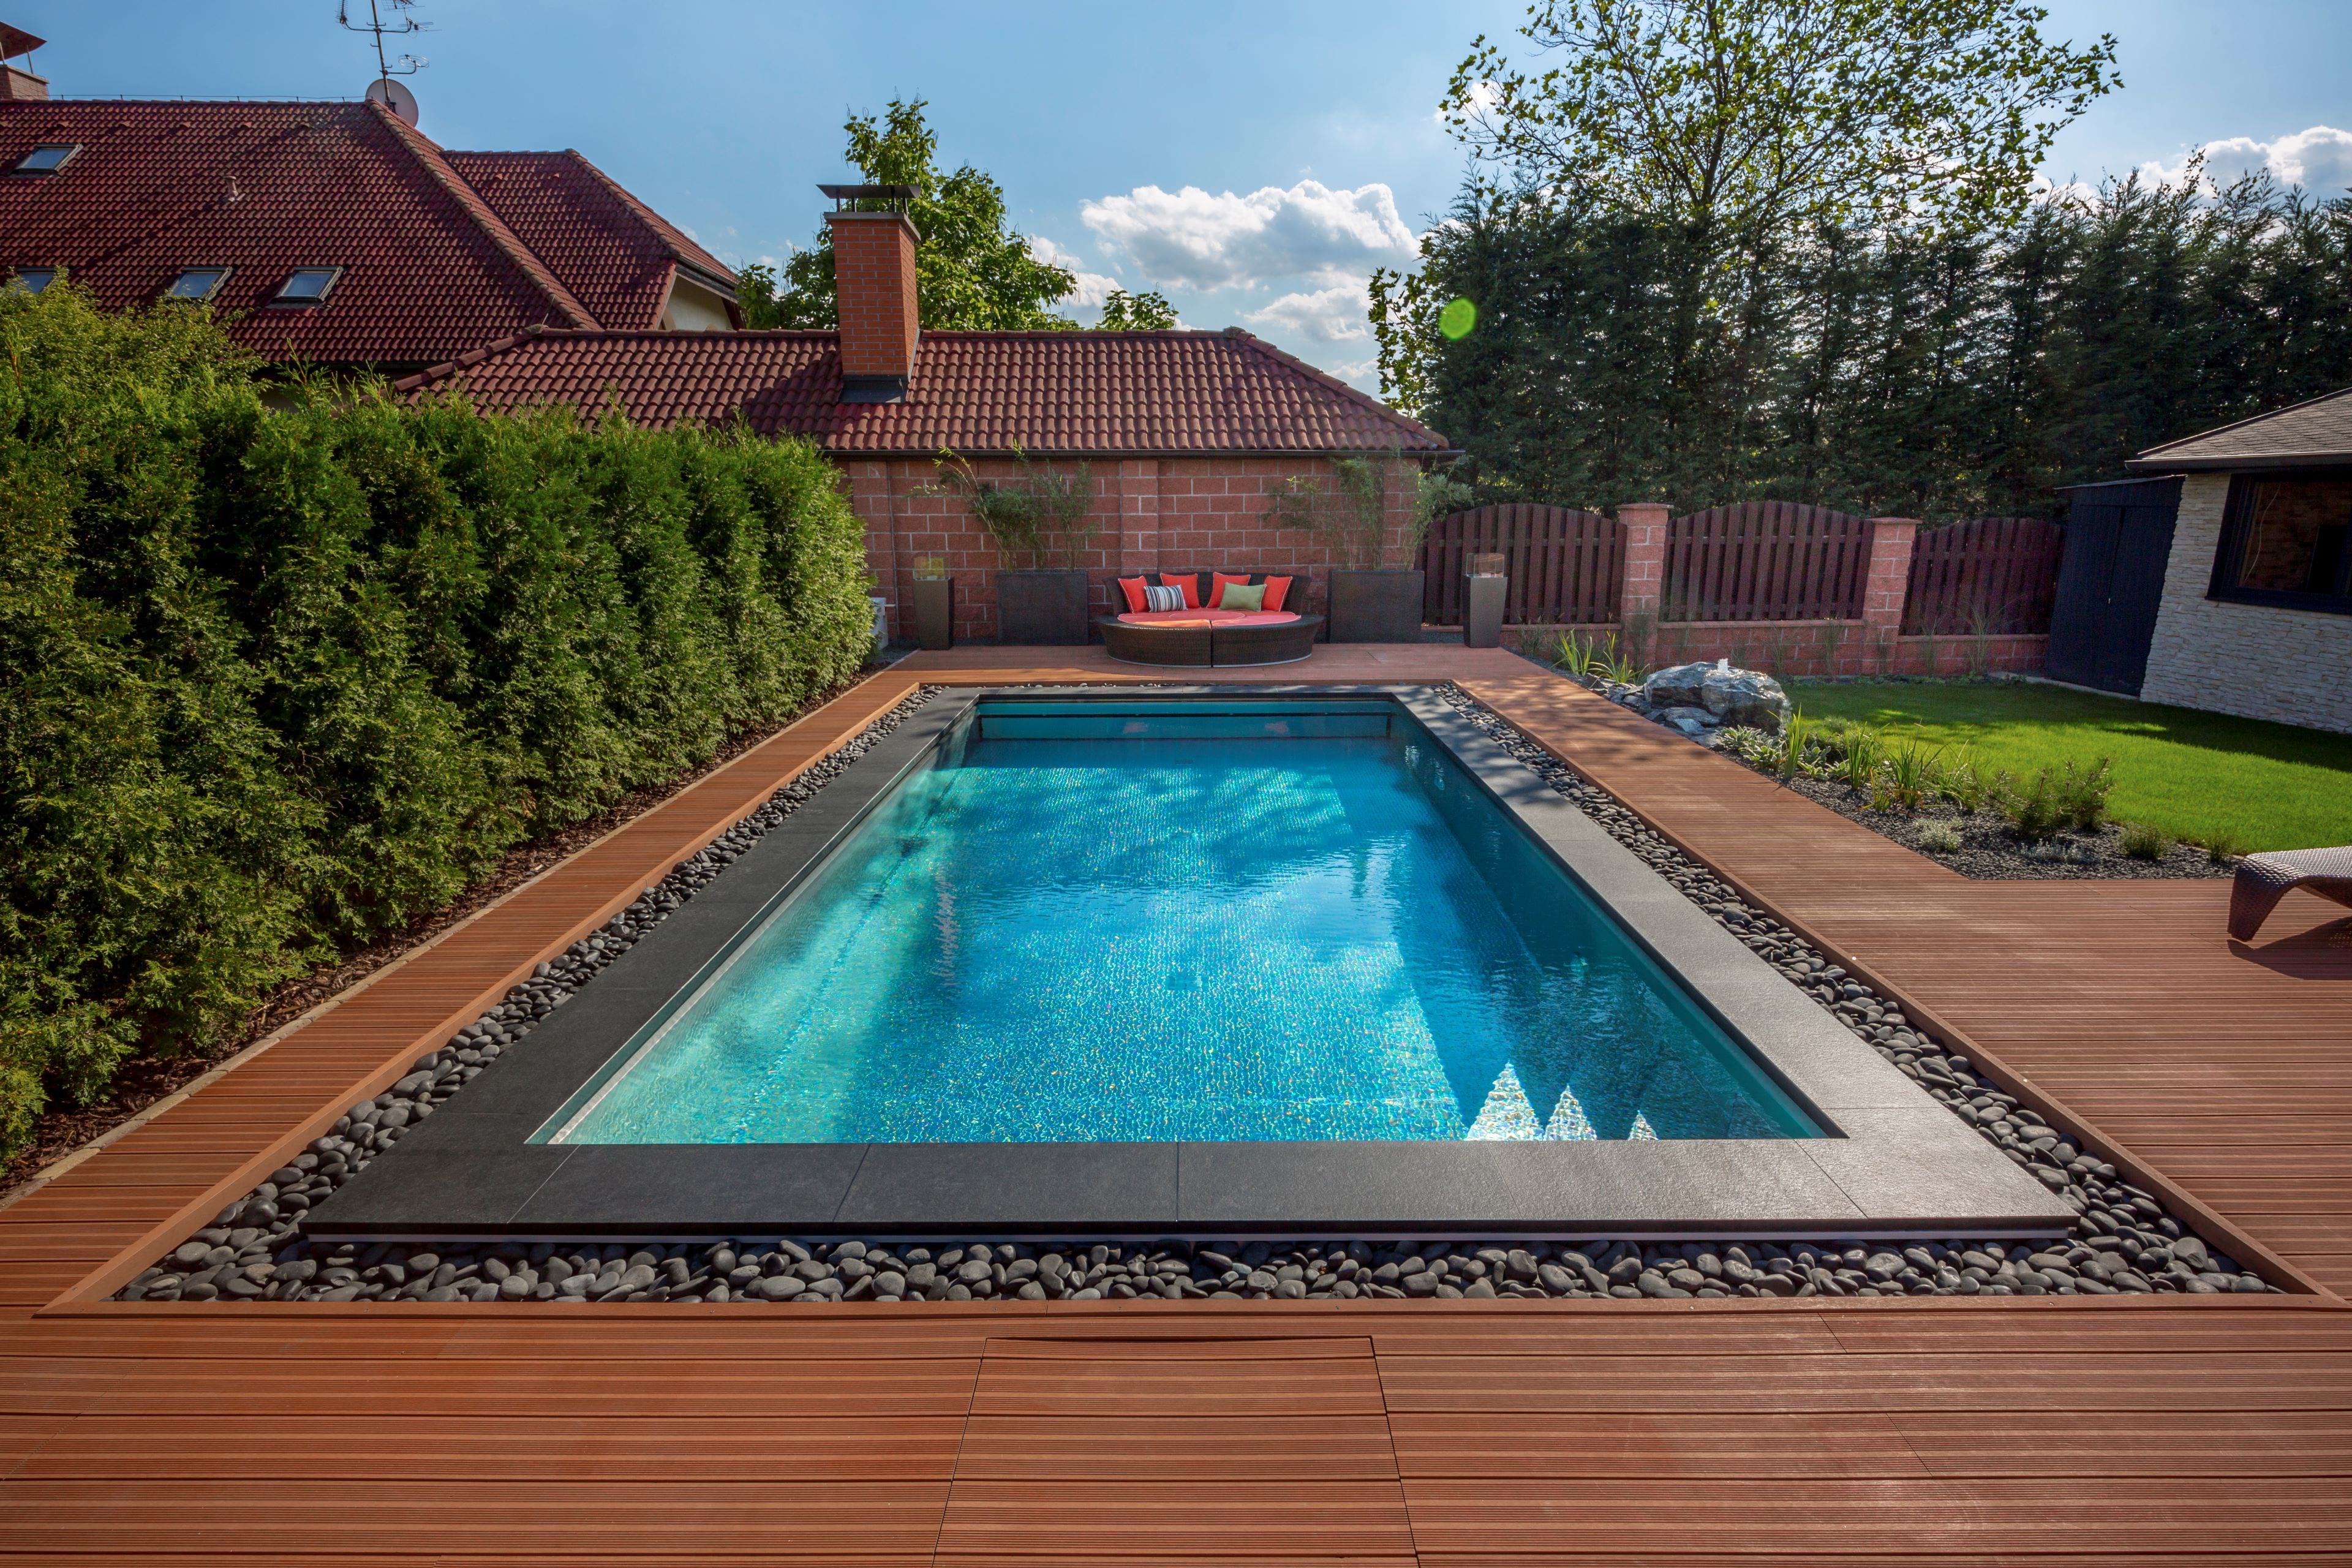 Stainless-Steel Pool with Hiden Overflow in the Garden